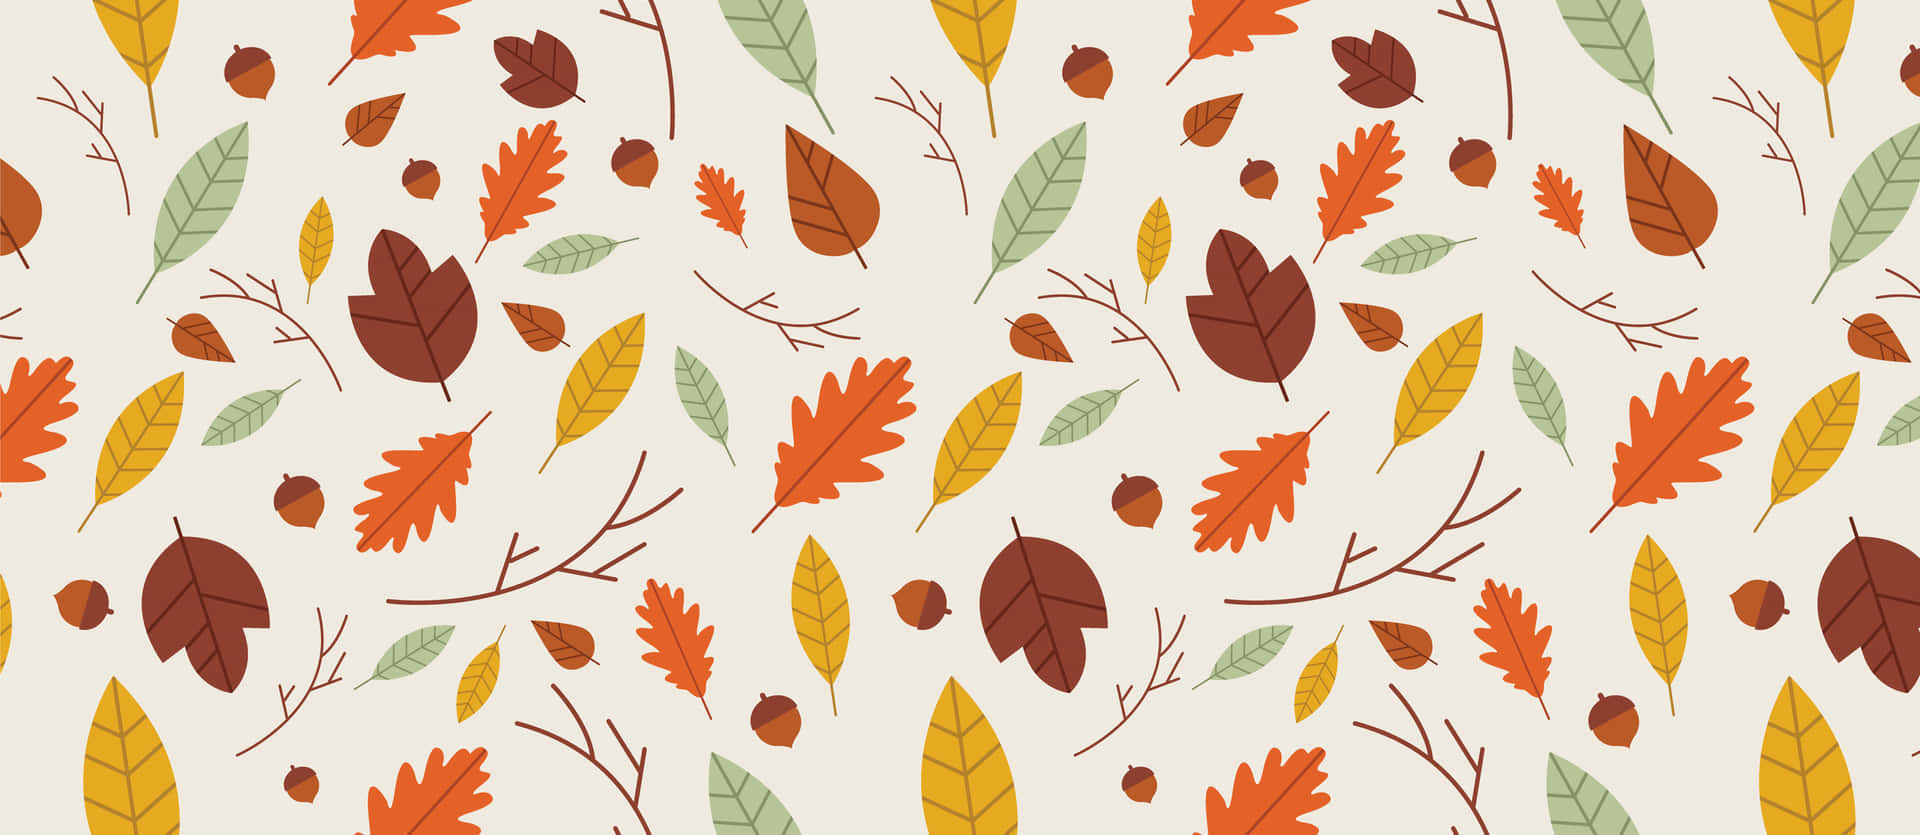 Capture the Charm of Autumn with This Cute Desktop Wallpaper Wallpaper